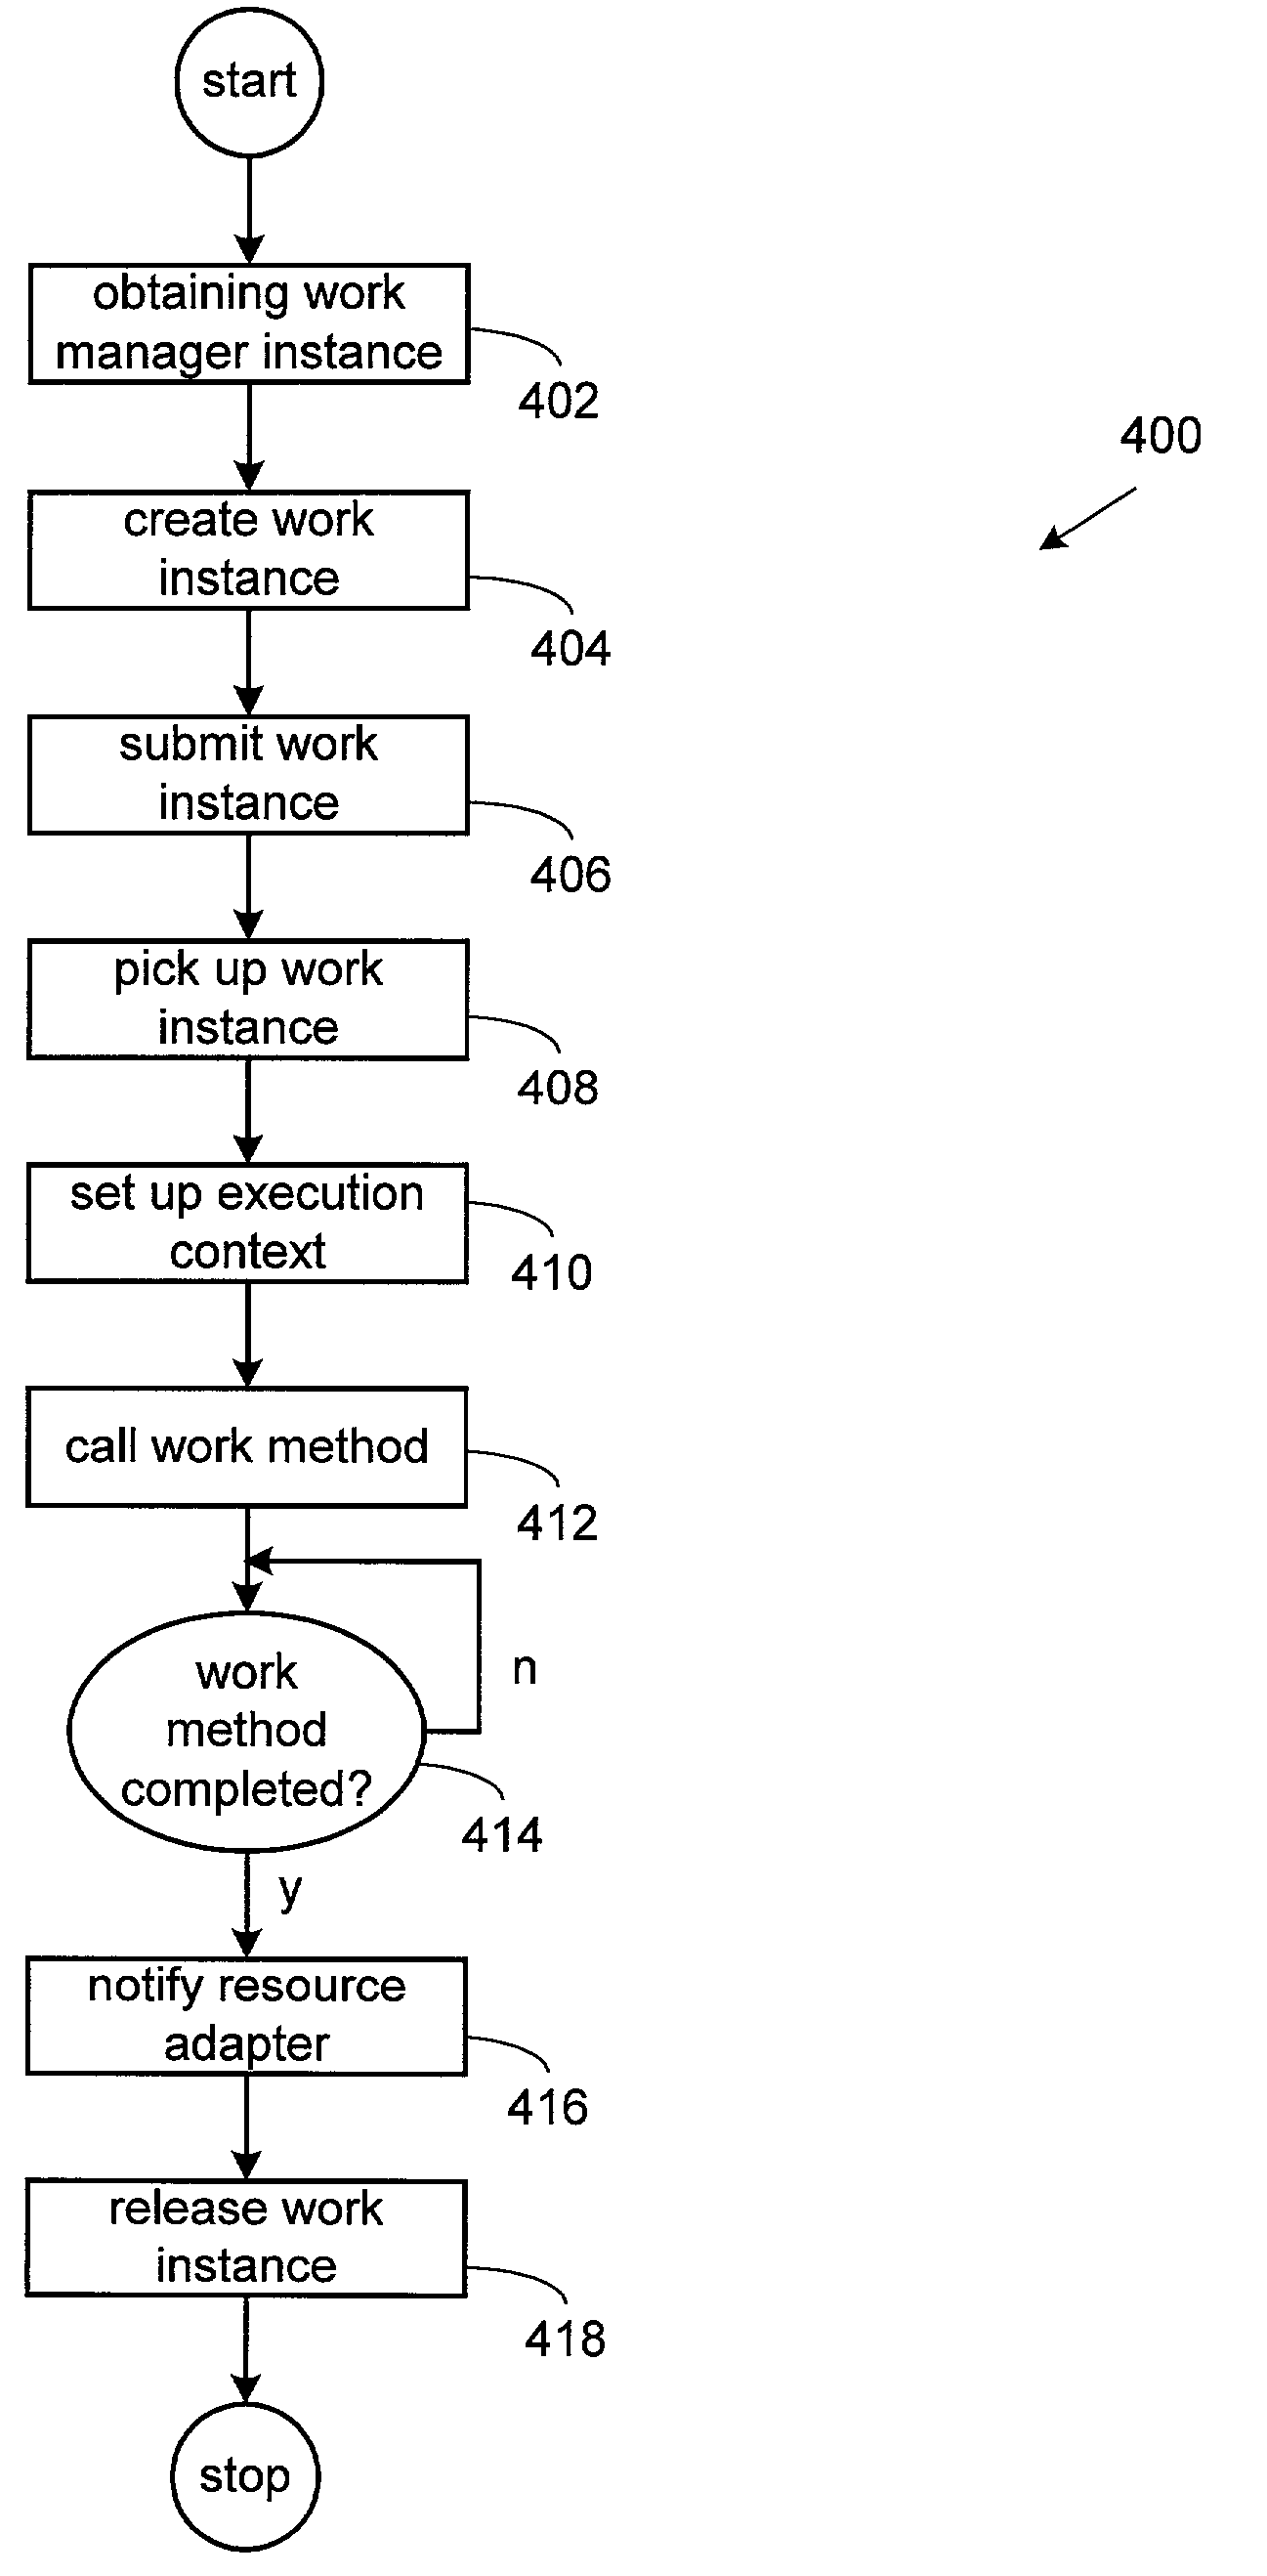 Callback event listener mechanism for resource adapter work executions performed by an application server thread